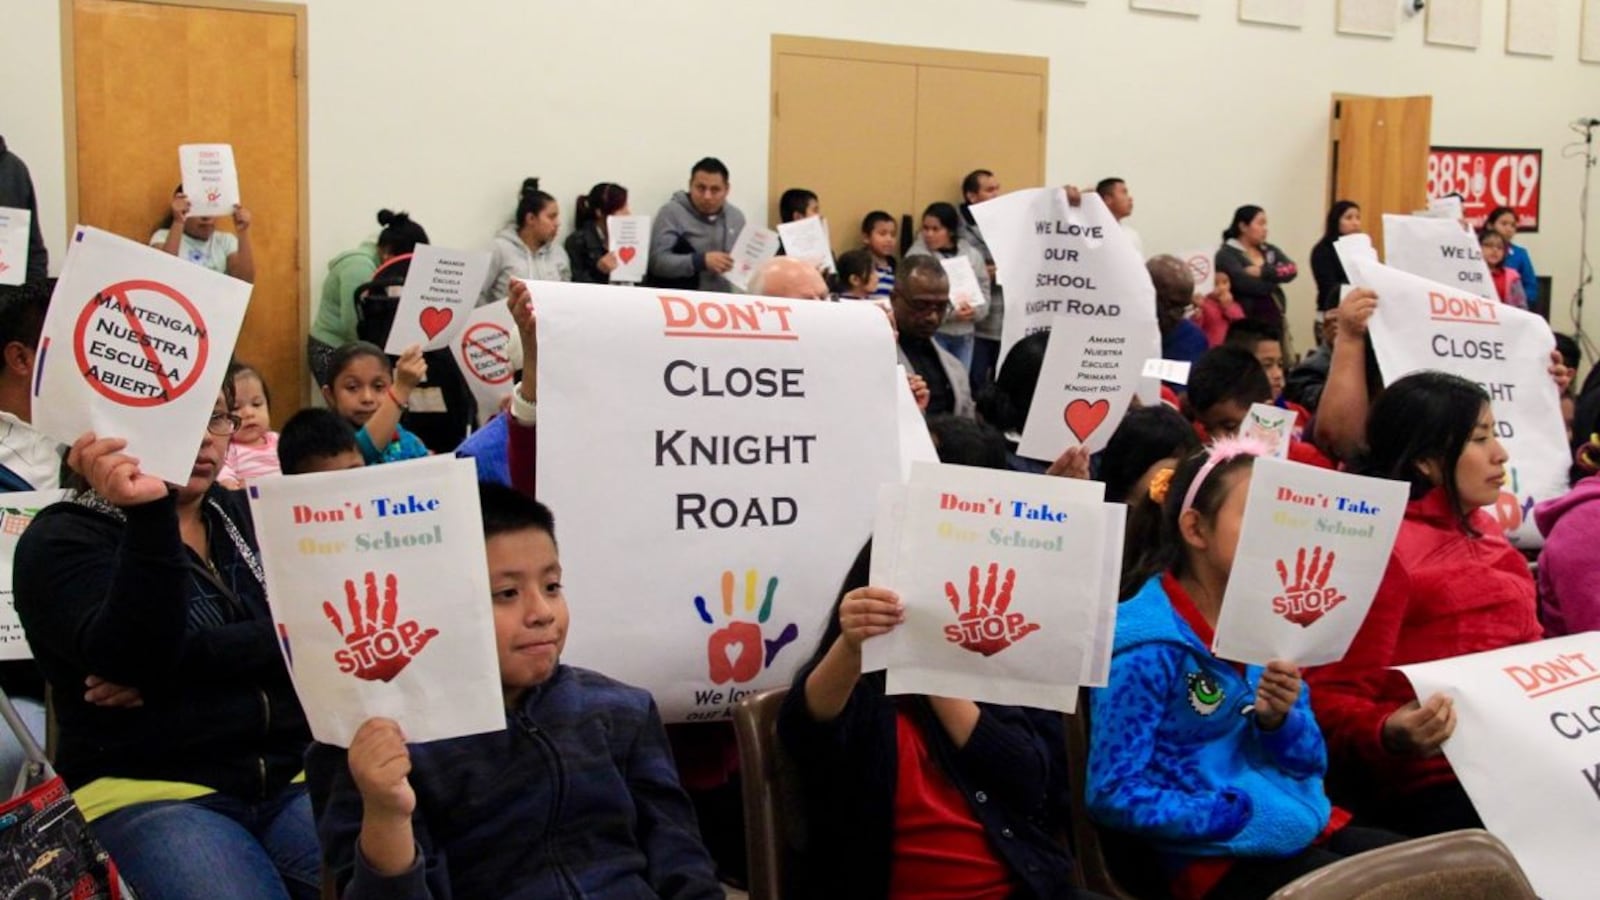 Parents and students from Knight Road Elementary School protest a proposal that would shutter their school during a board meeting for Shelby County Schools.